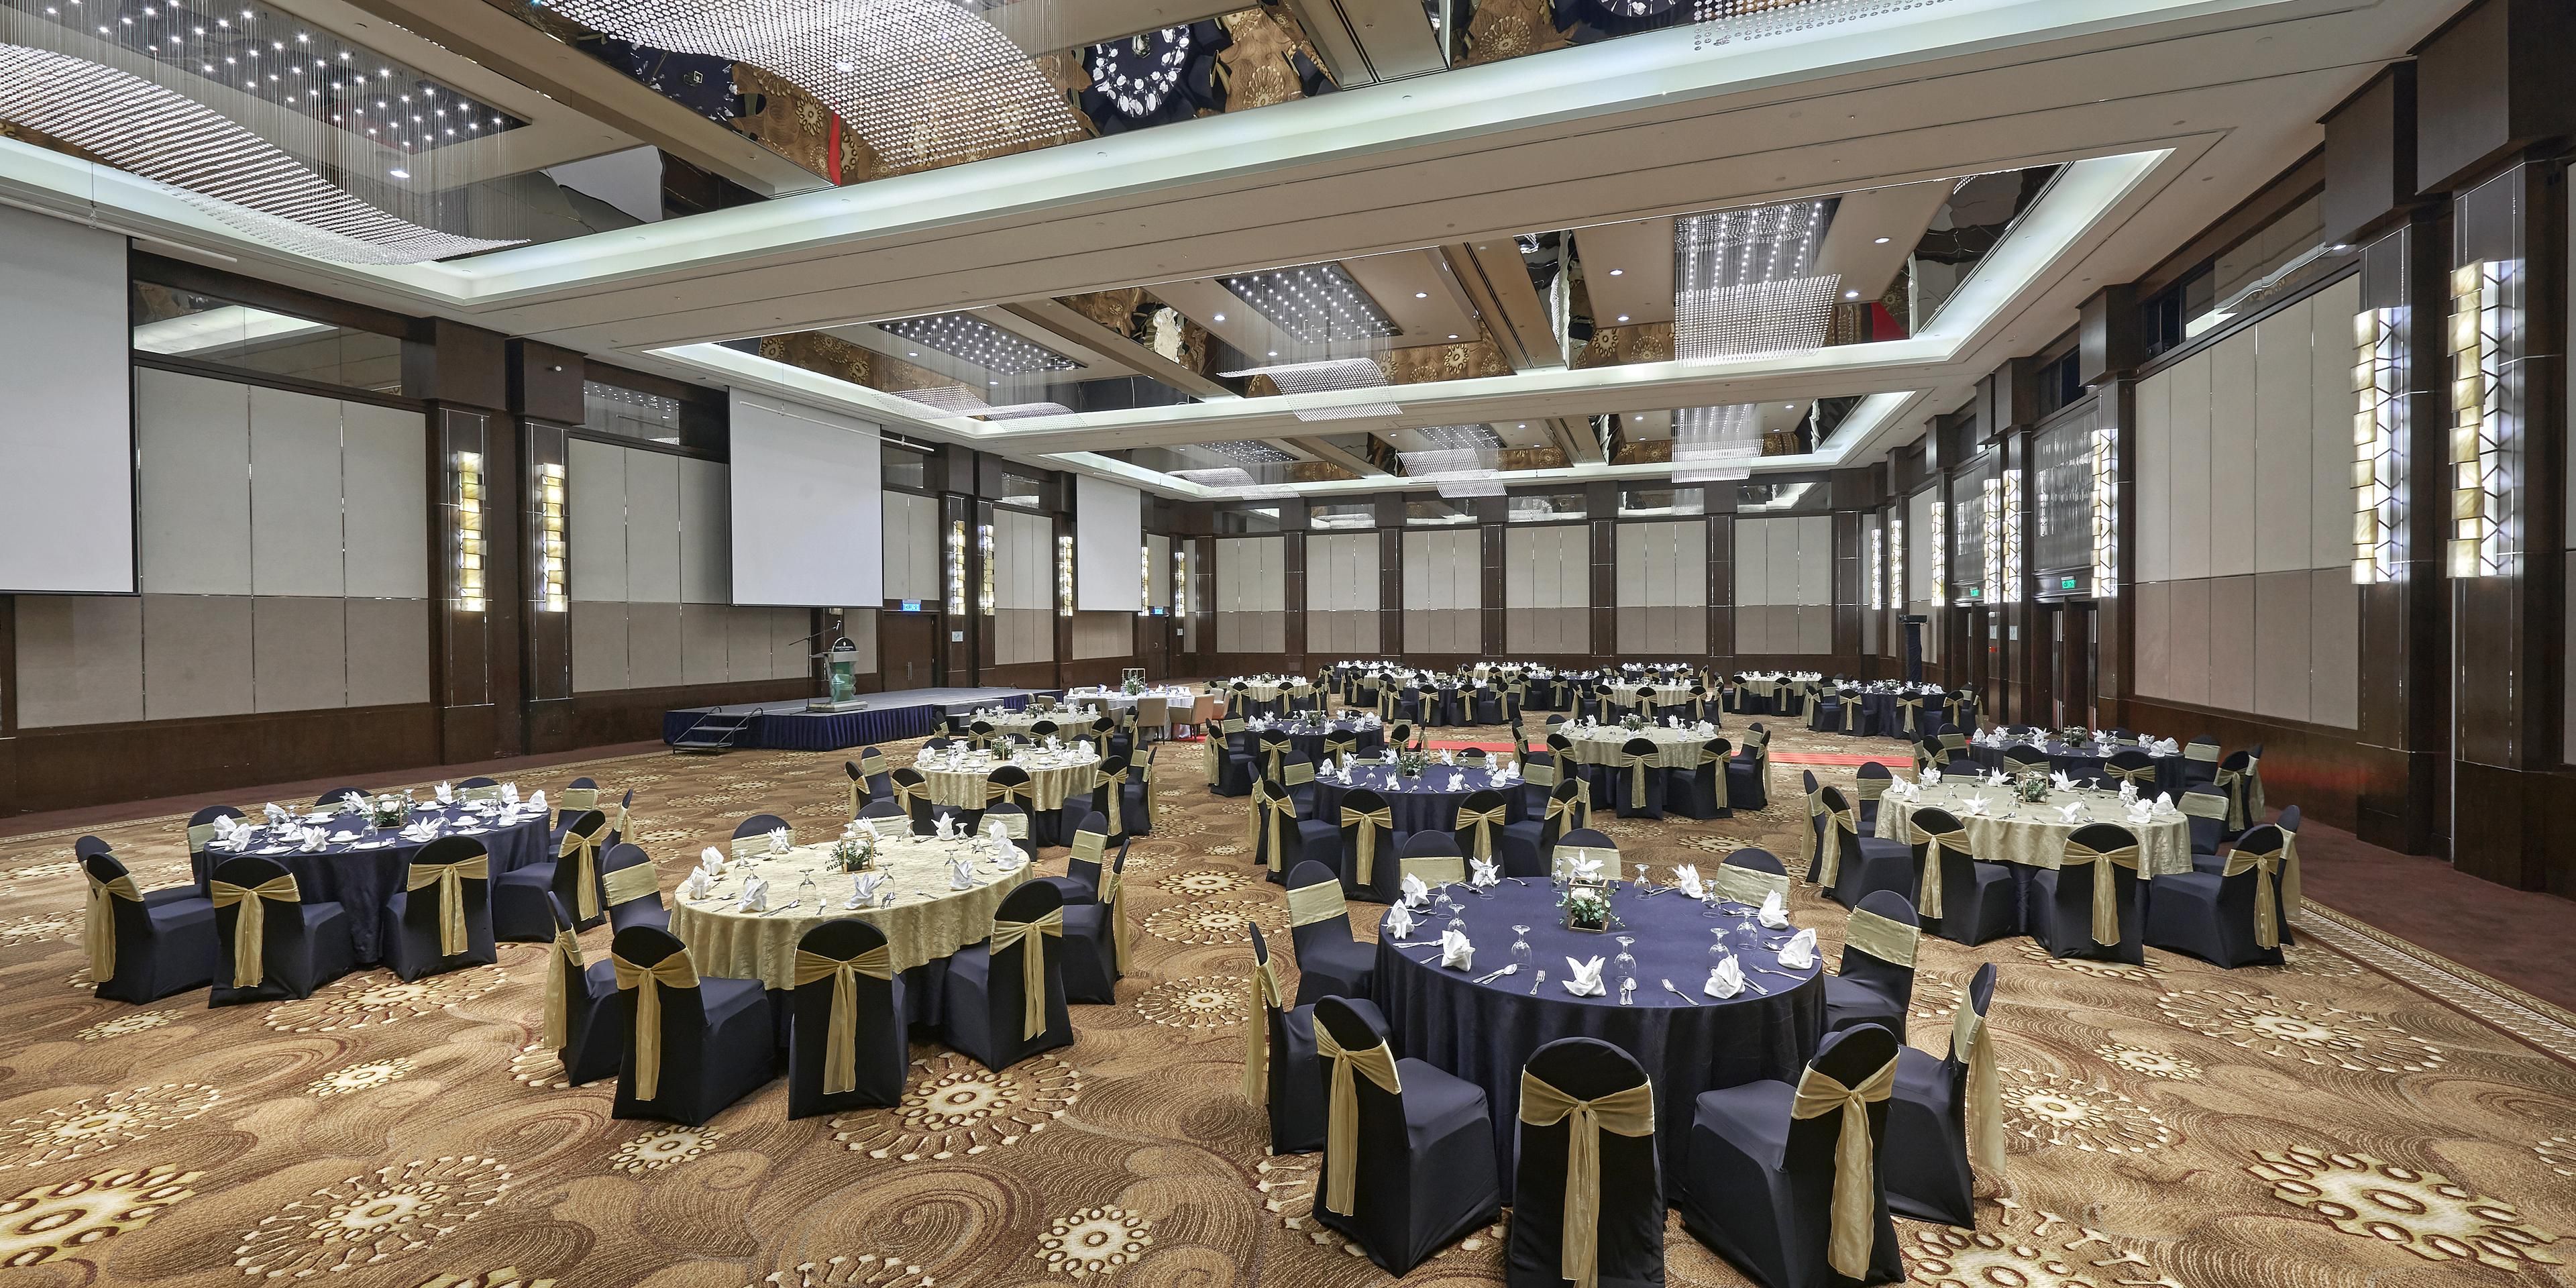 We offer eight meetings rooms equipped with multi-functional capabilities and two magnificent, pillarless ballrooms that are perfect for larger gatherings. From intimate gatherings of 20, a wedding of 800 and up to 1,300 delegates for a large conference, we can host it all for you. Let our team of experts create your perfect event. 